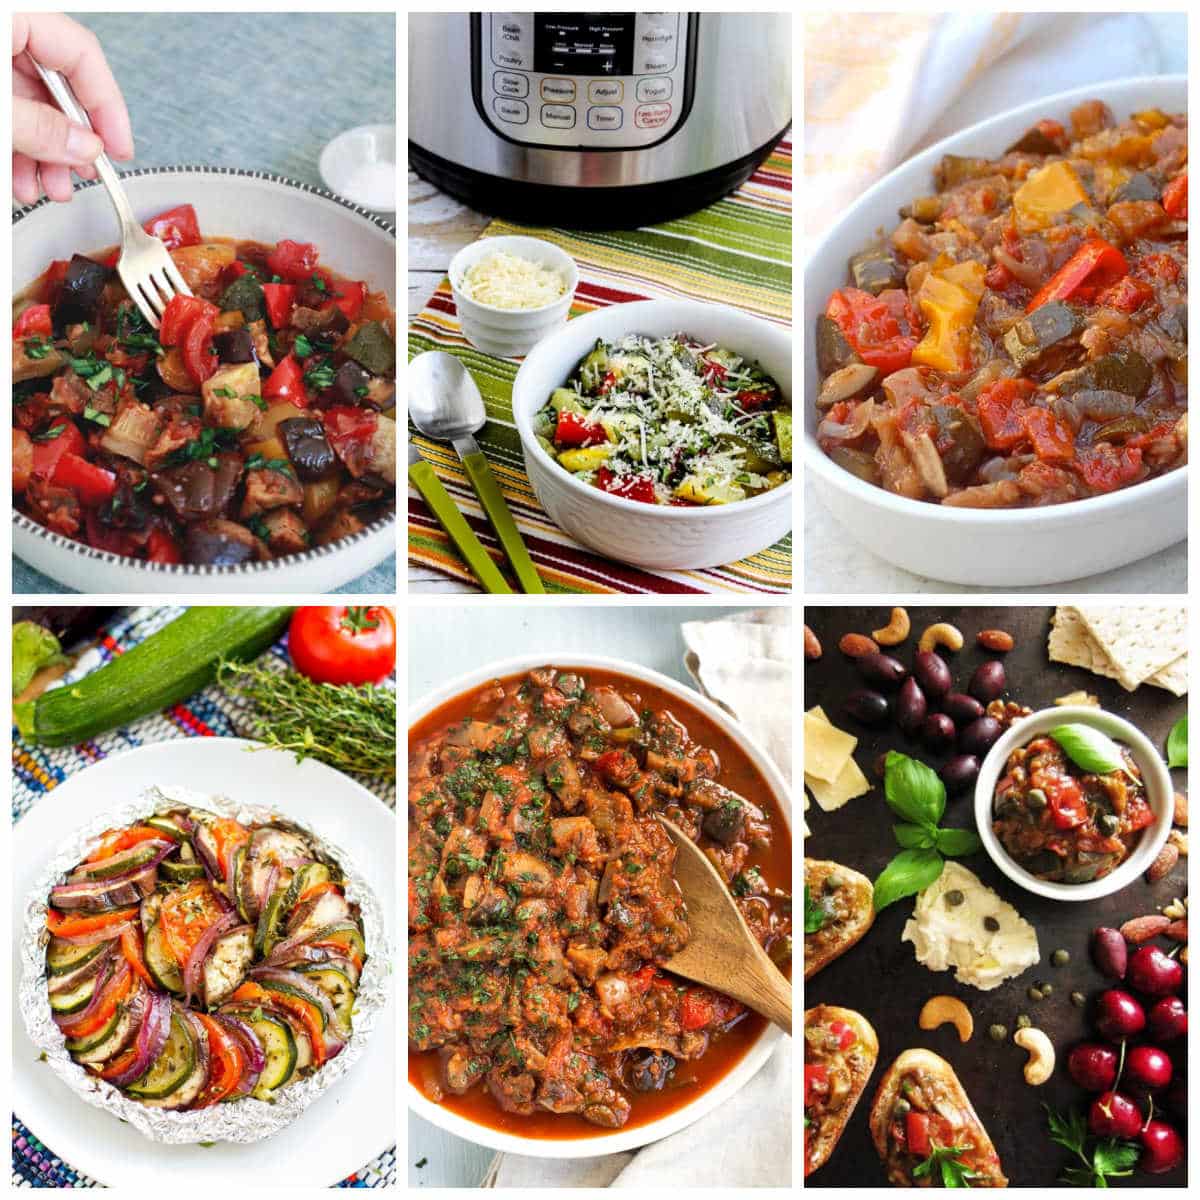 Slow Cooker or Instant Pot Ratatouille Recipes collage showing featured recipes.